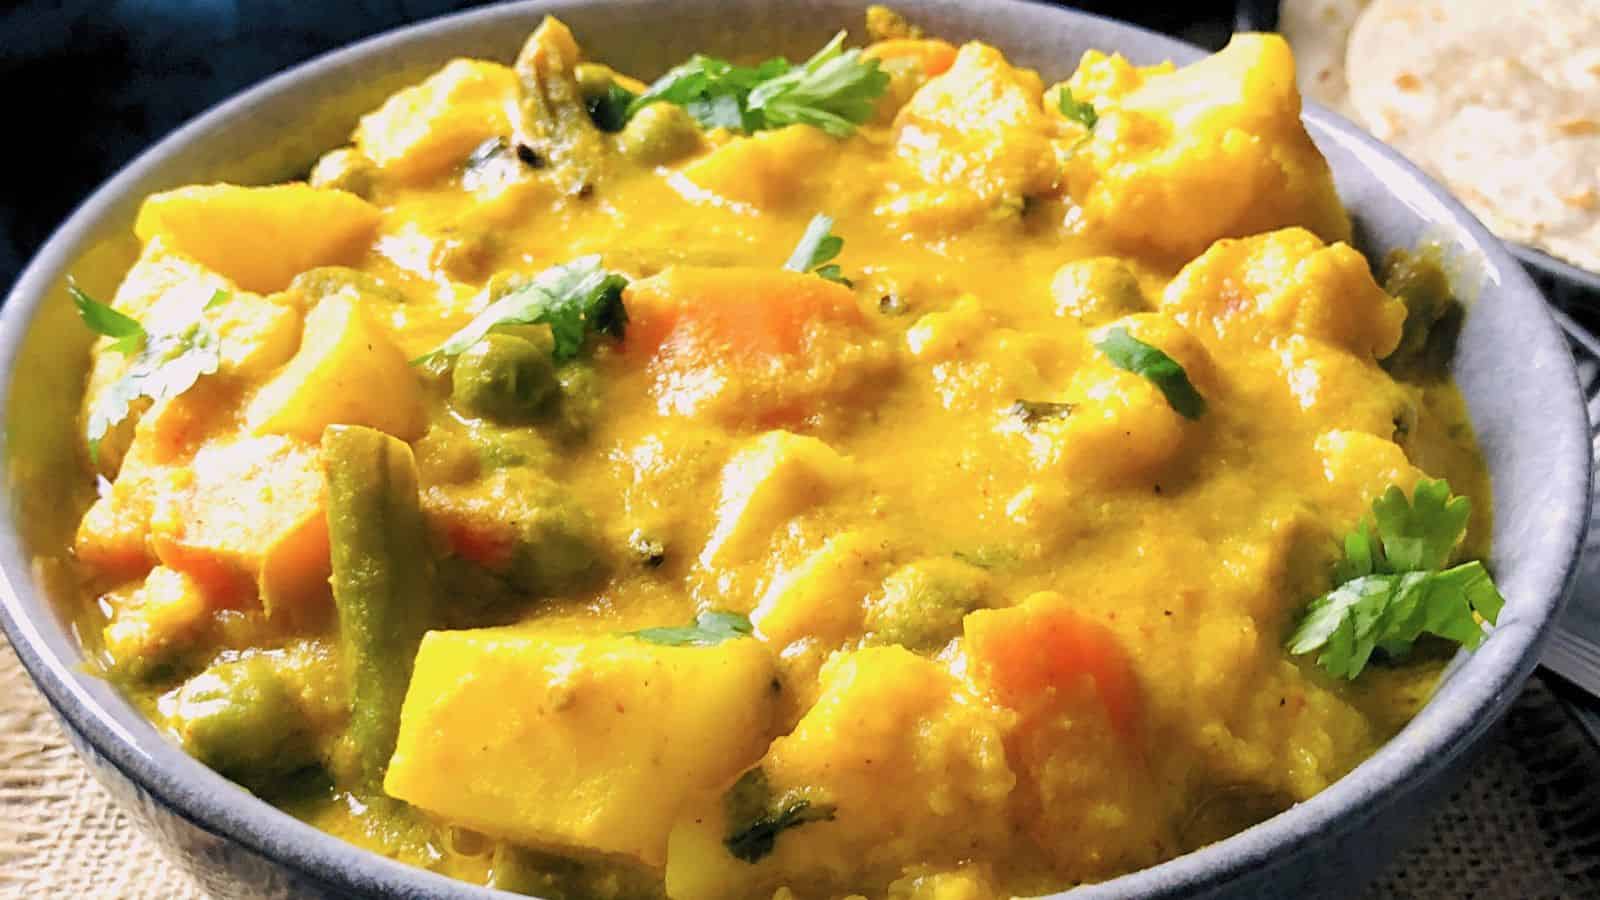 <p>This vegetable korma commands respect with its layers of spices, creamy coconut richness, and nutty undertones. All built up in a surprisingly simple Instant Pot friendly-way.<br><strong>Get the Recipe: </strong><a href="https://easyindiancookbook.com/instant-pot-vegetable-korma/?utm_source=msn&utm_medium=page&utm_campaign=msn">Instant Pot Vegetable Korma</a></p>